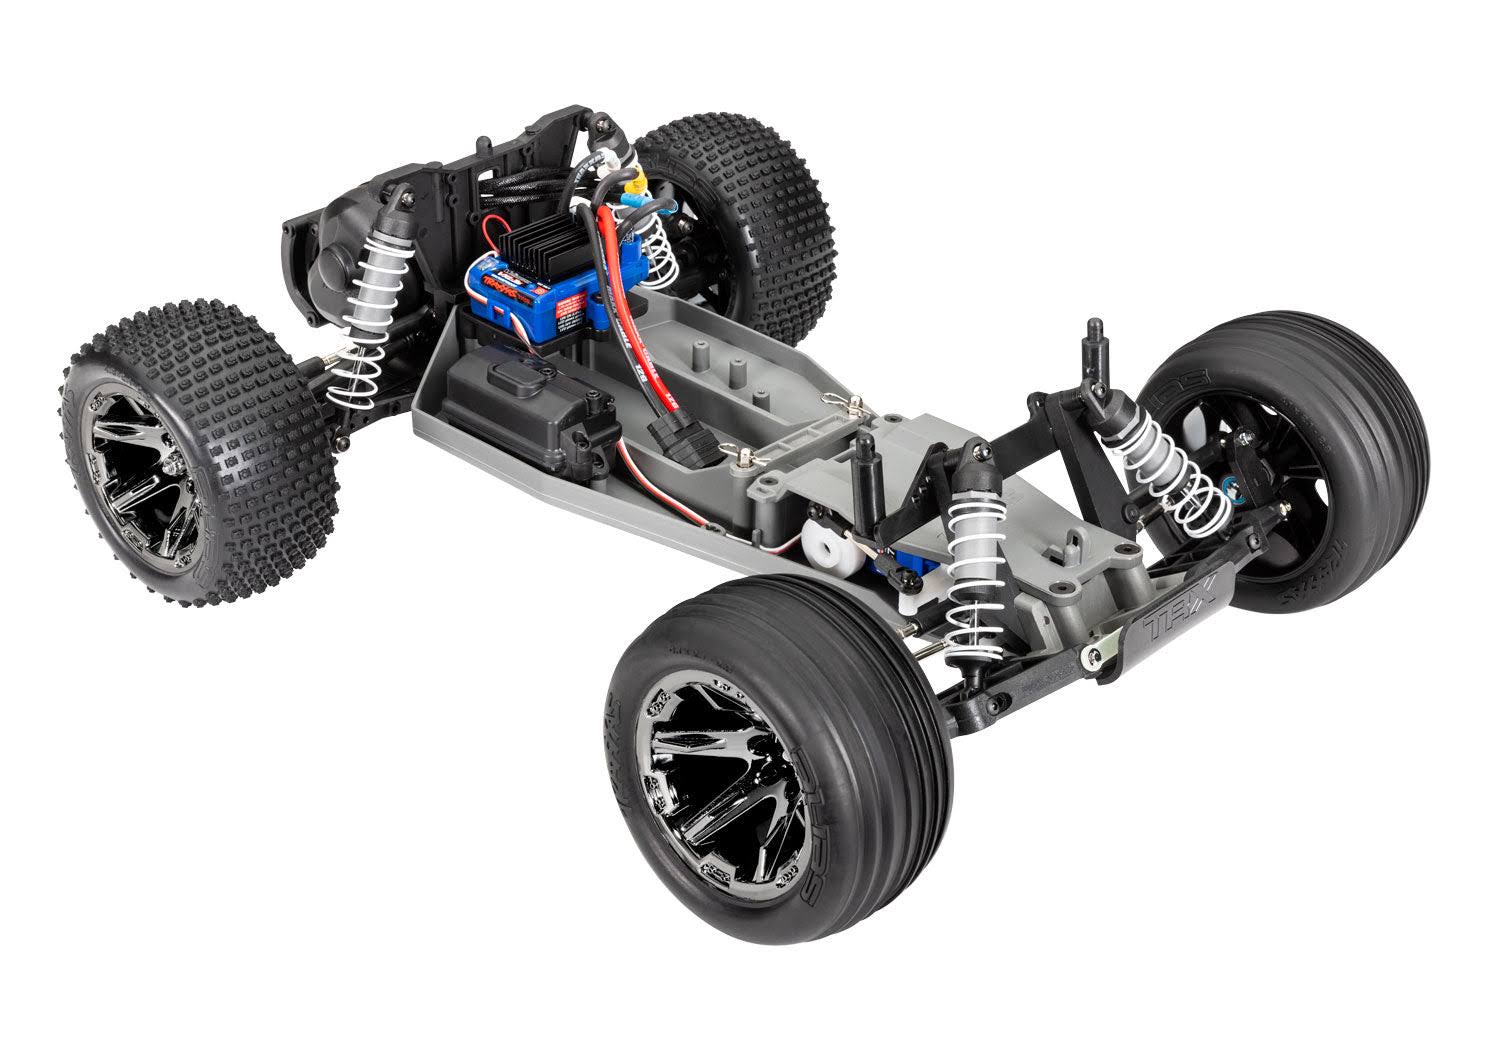 Traxxas - Rustler VXL RTR 2WD RC Truck with Magnum 272R Transmission - Black - 1/10 Scale - Battery & Charger Not Included (37076-74-BLK)